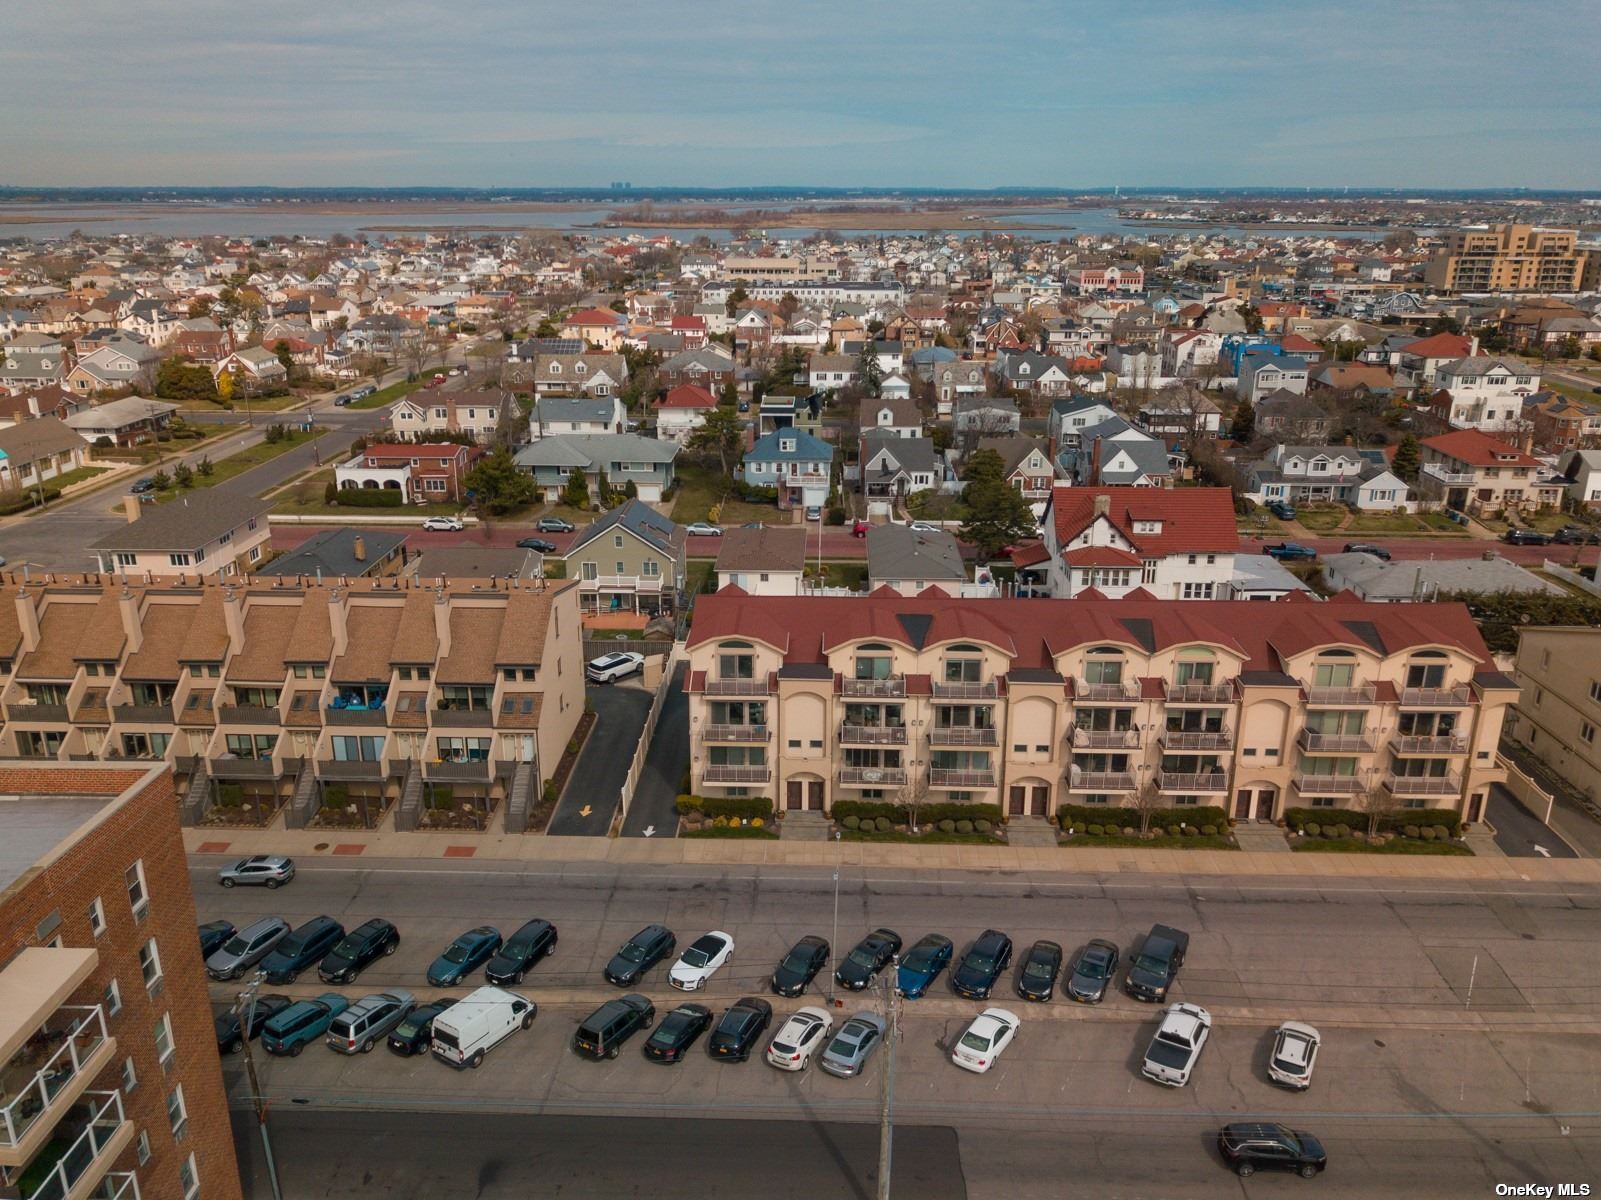 an aerial view of a building with parking